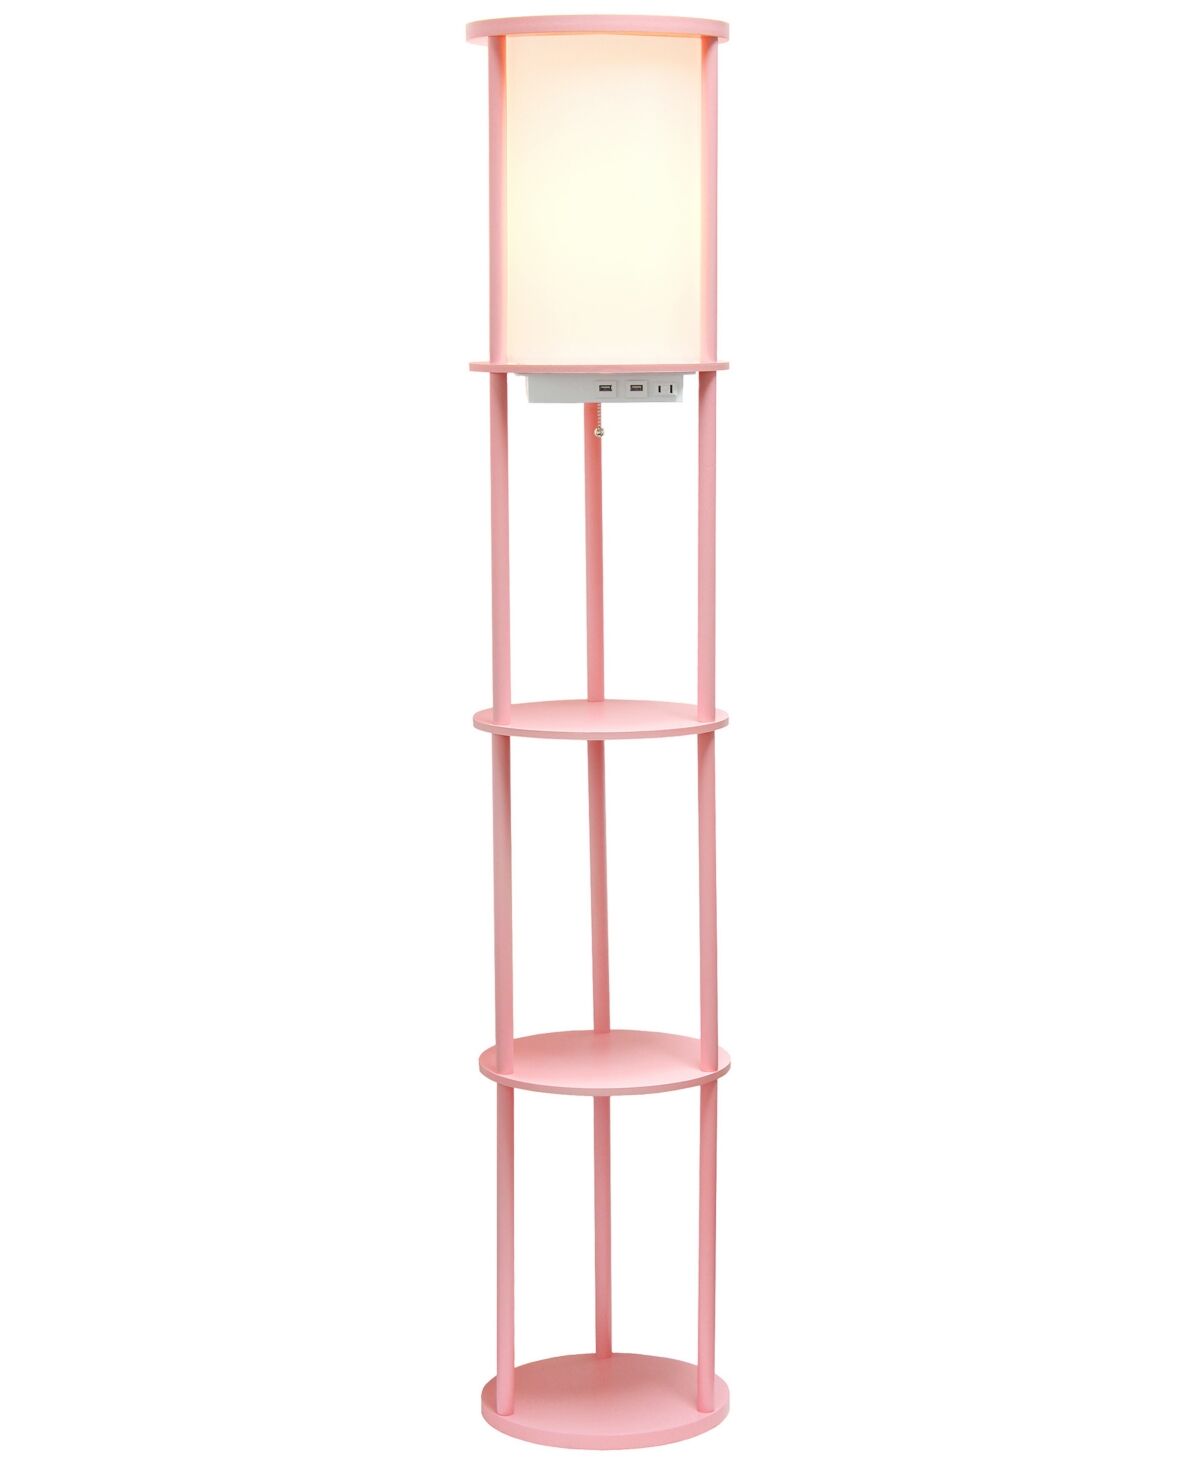 All The Rages Etagere Organizer Storage Floor Lamp with 2 Usb Charging Ports, 1 Charging Outlet - Light Pink